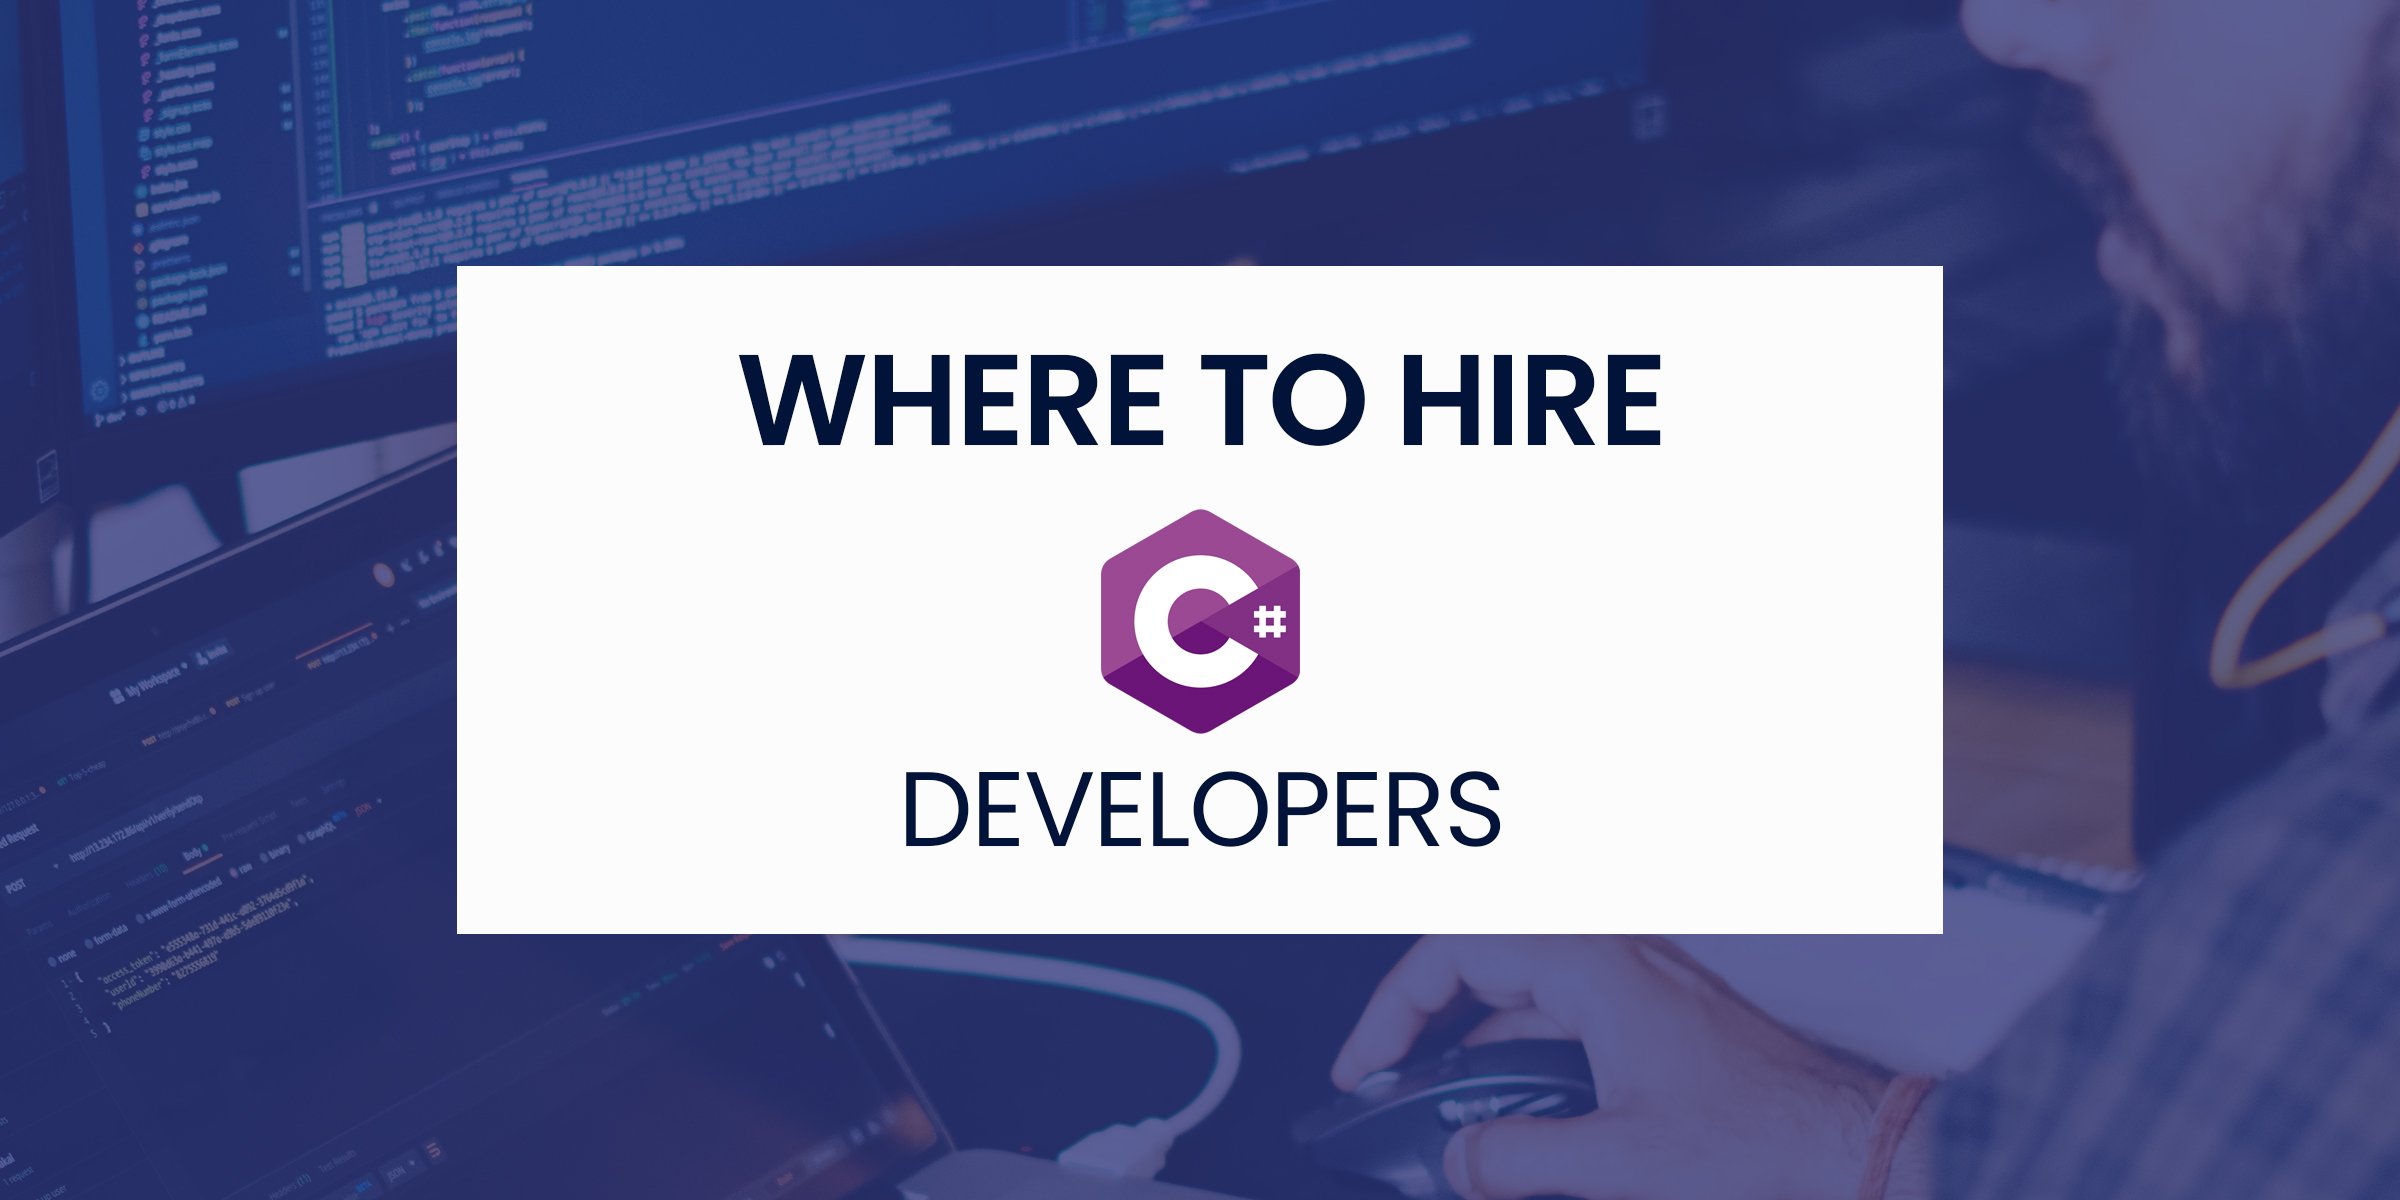 Where to Hire C Developers